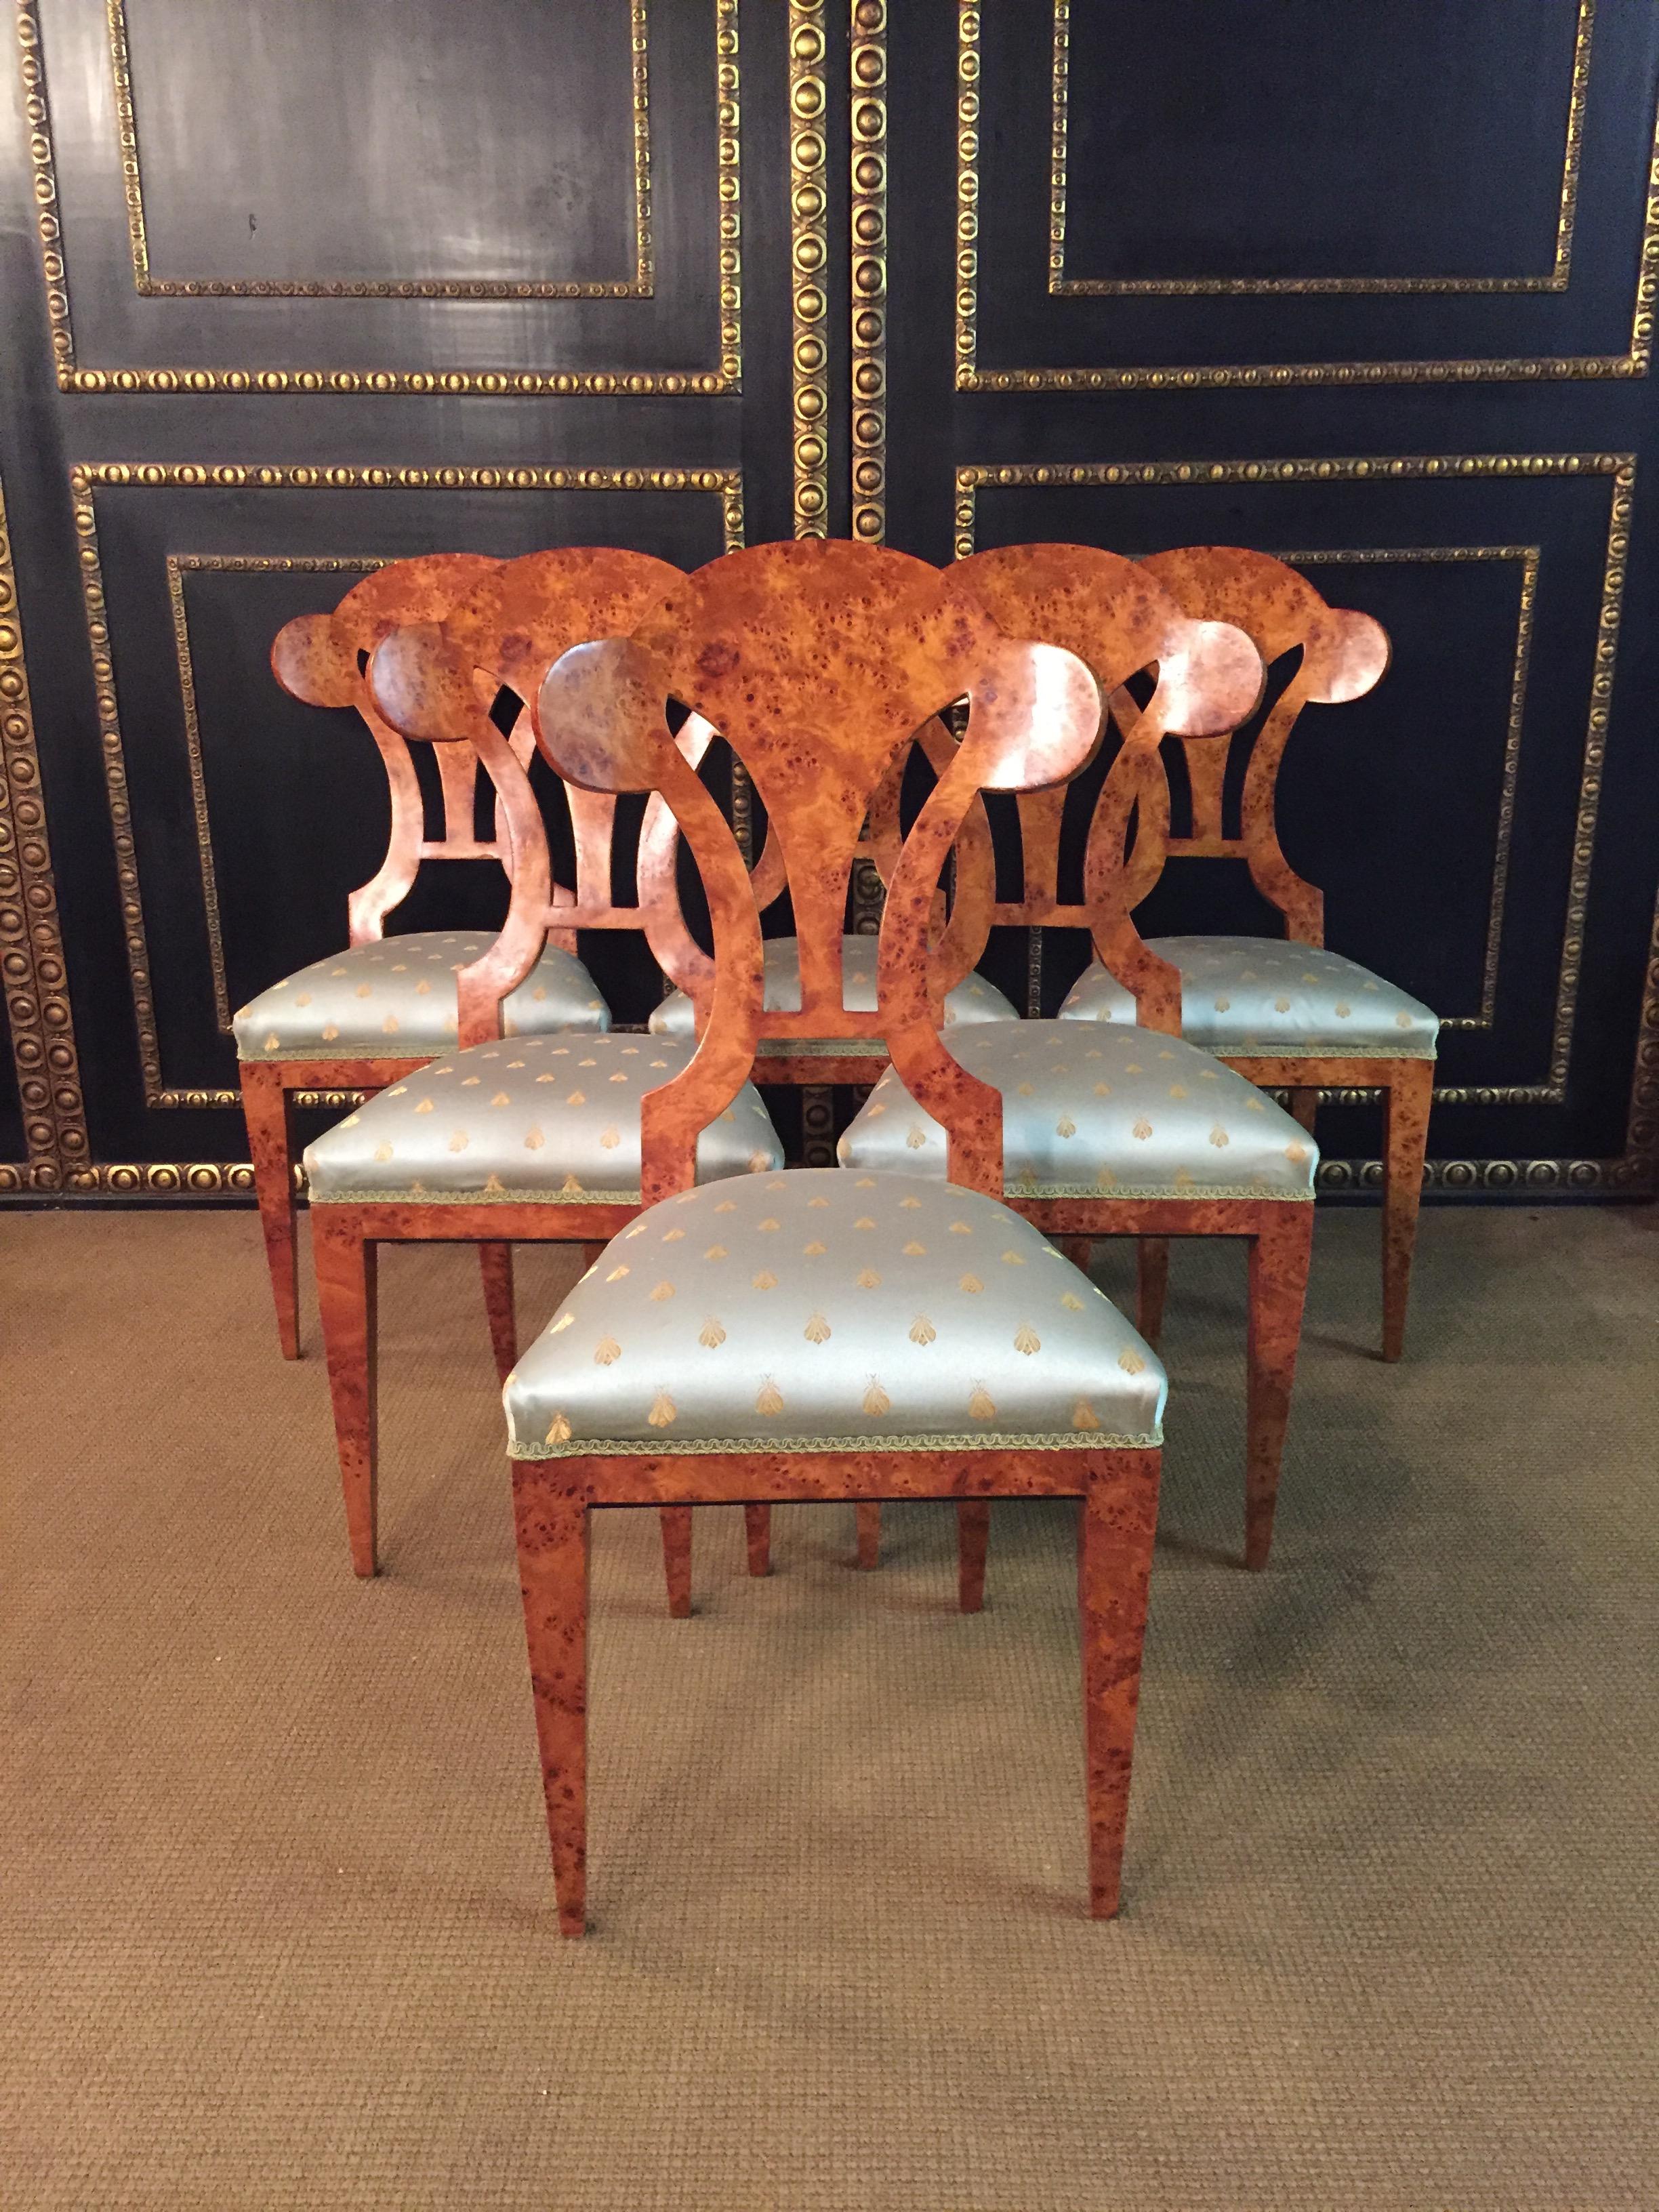 Solid beechwood with maple root veneer. Seat classical upholstered.
Beautiful shape with a fantastic veneer picture, bird's eye maple.
High quality fabric.

Very rare as a set of 6 Chairs.